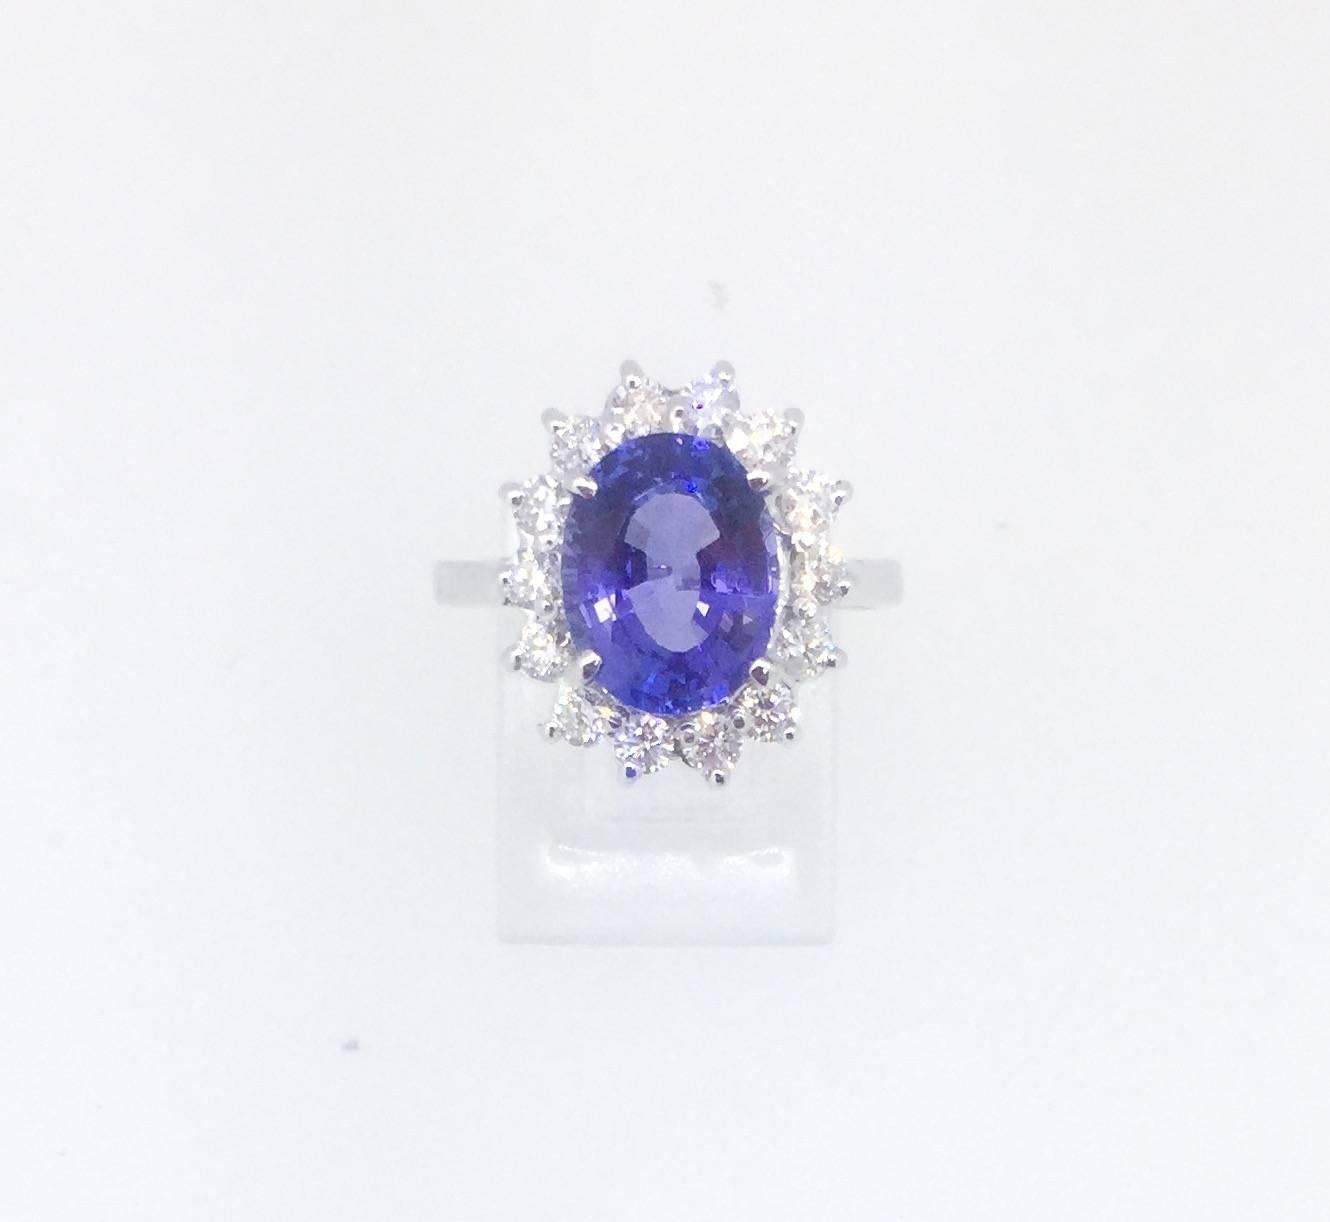 A gorgeous 3.91 Carat Tanzanite and Diamond Ring! 

The Tanzanite is an Oval cut stone and weighs 3.28 carats.  The ring is surrounded by 14 Round Brilliant Cut diamonds that weigh 0.63 carats. (Clarity: SI1 and Color: F)  The total carat weight of